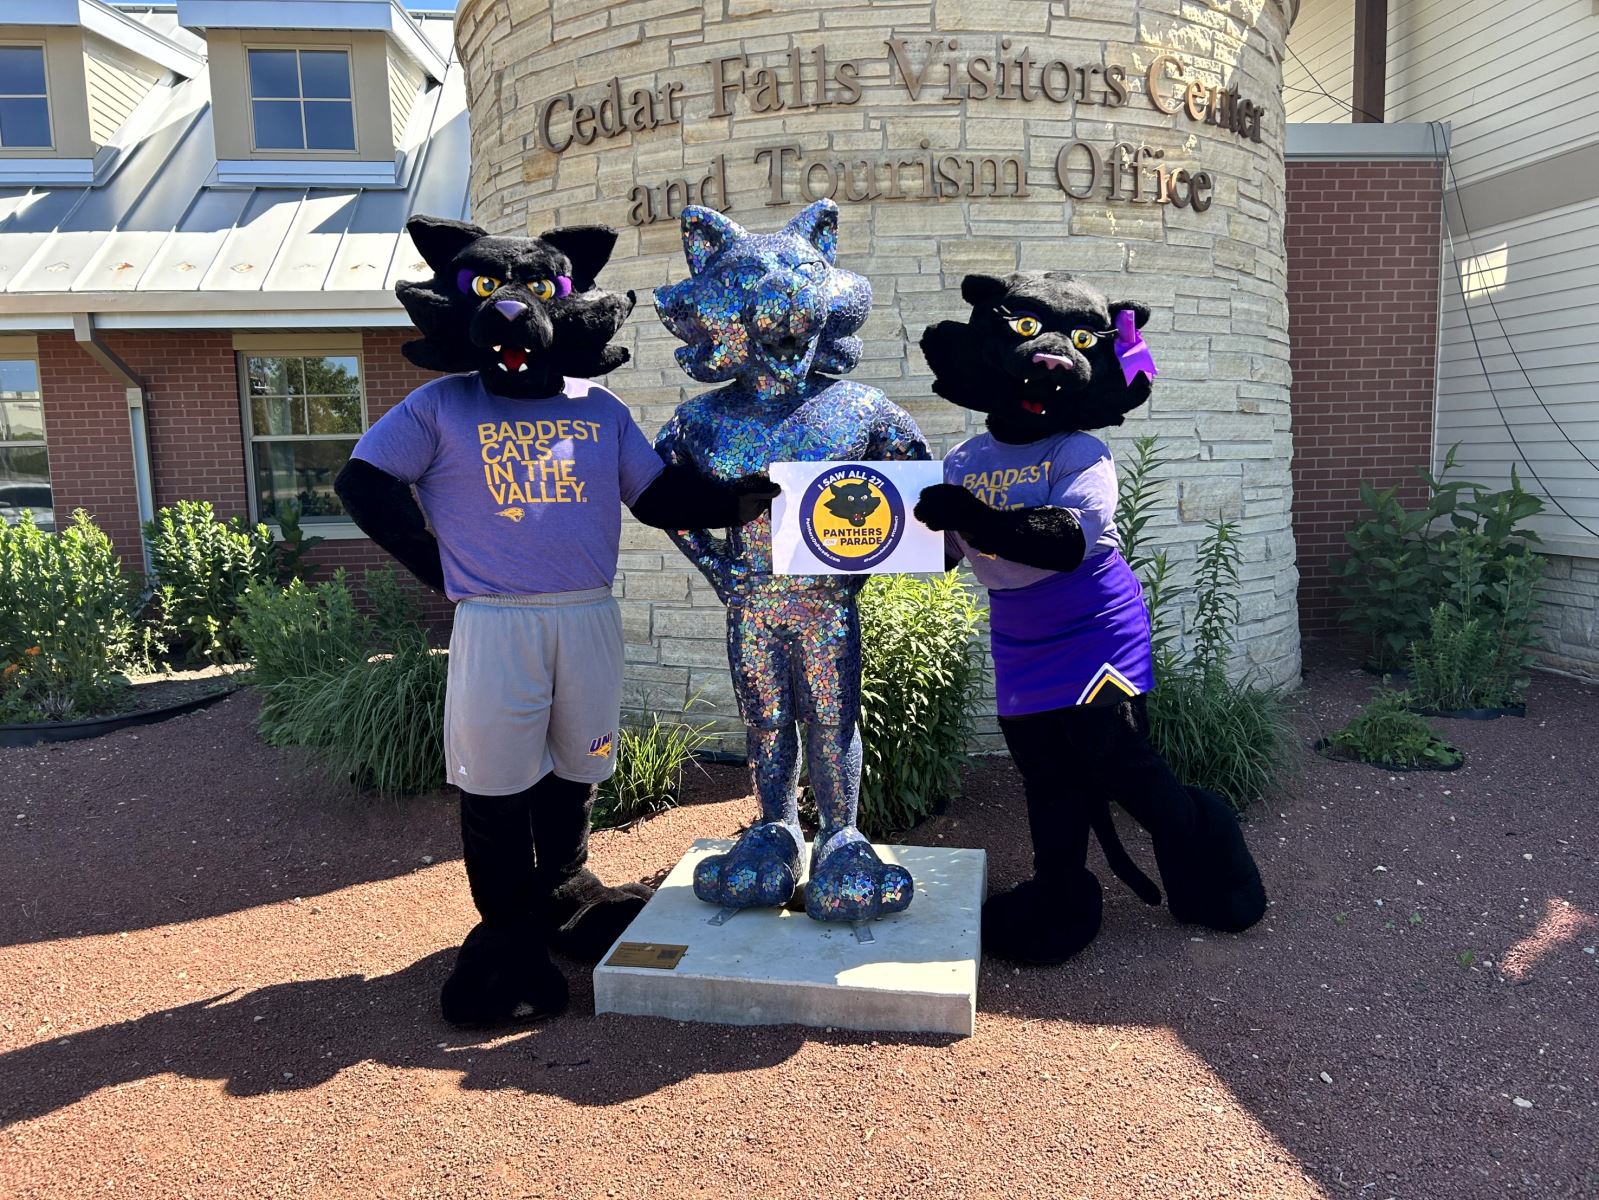 TC and TK at the Cedar Falls Visitor Center